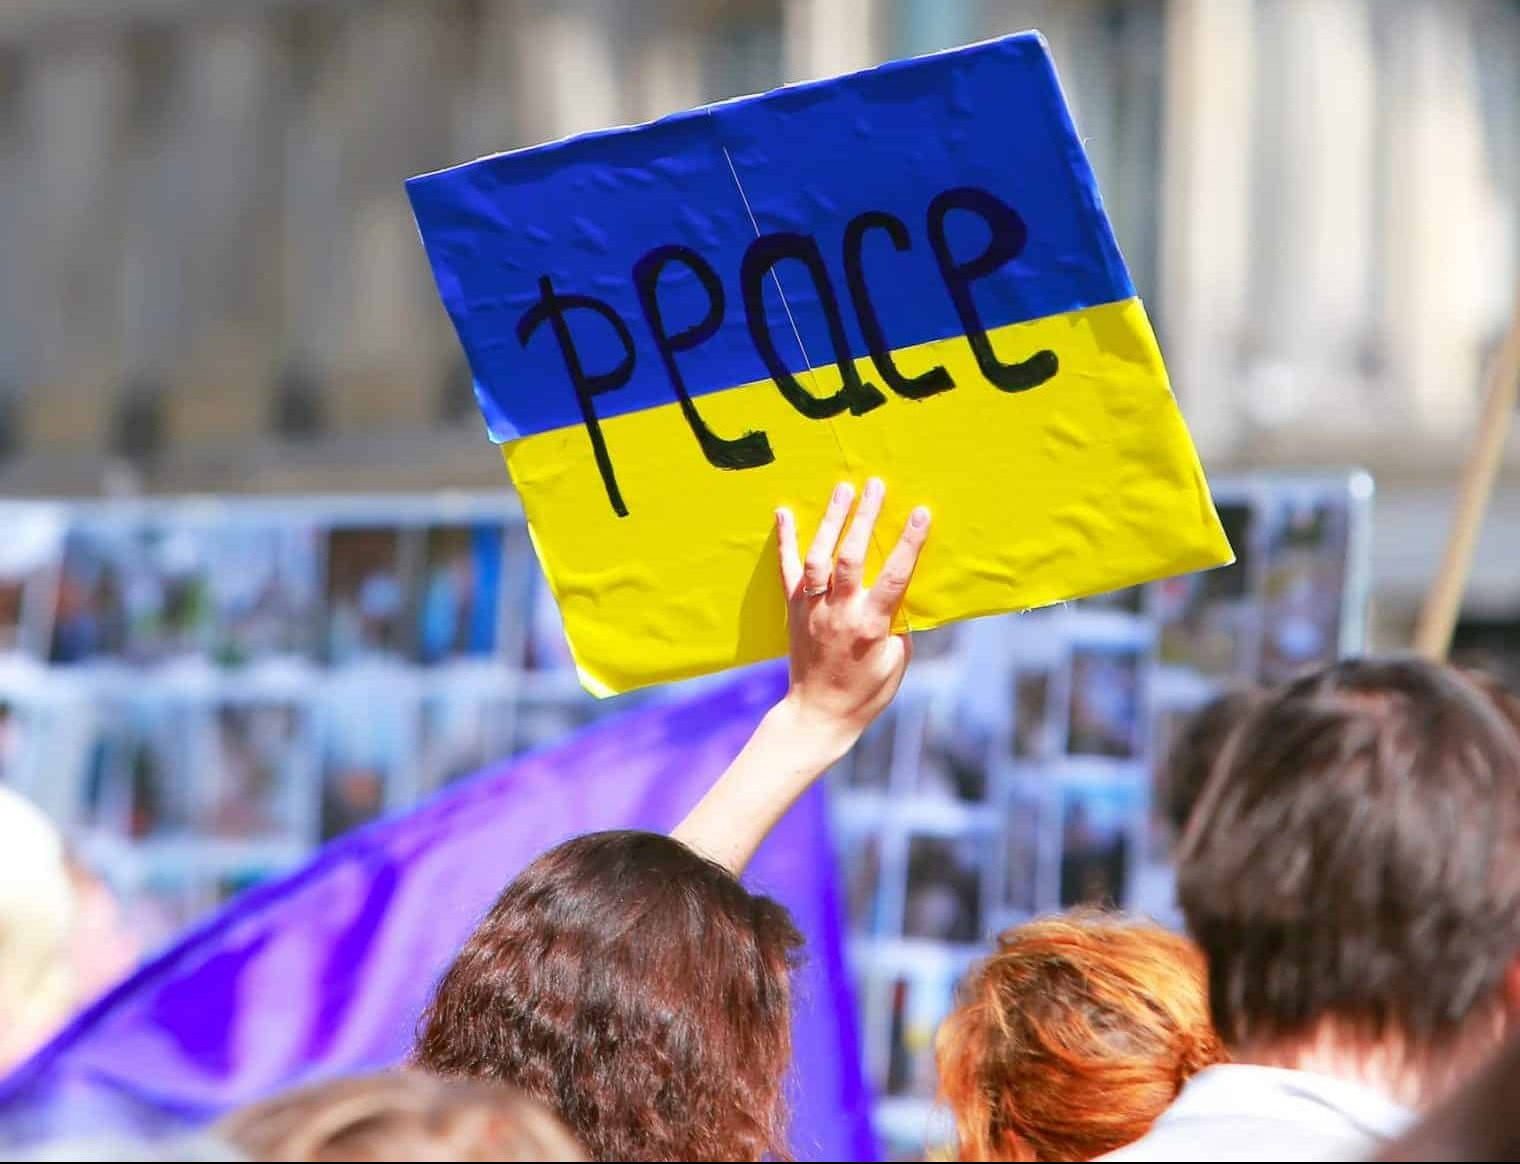 Just take it and make peace: how Ukrainians are being forced to adopt ‘pacifism’ and ‘objectivity’